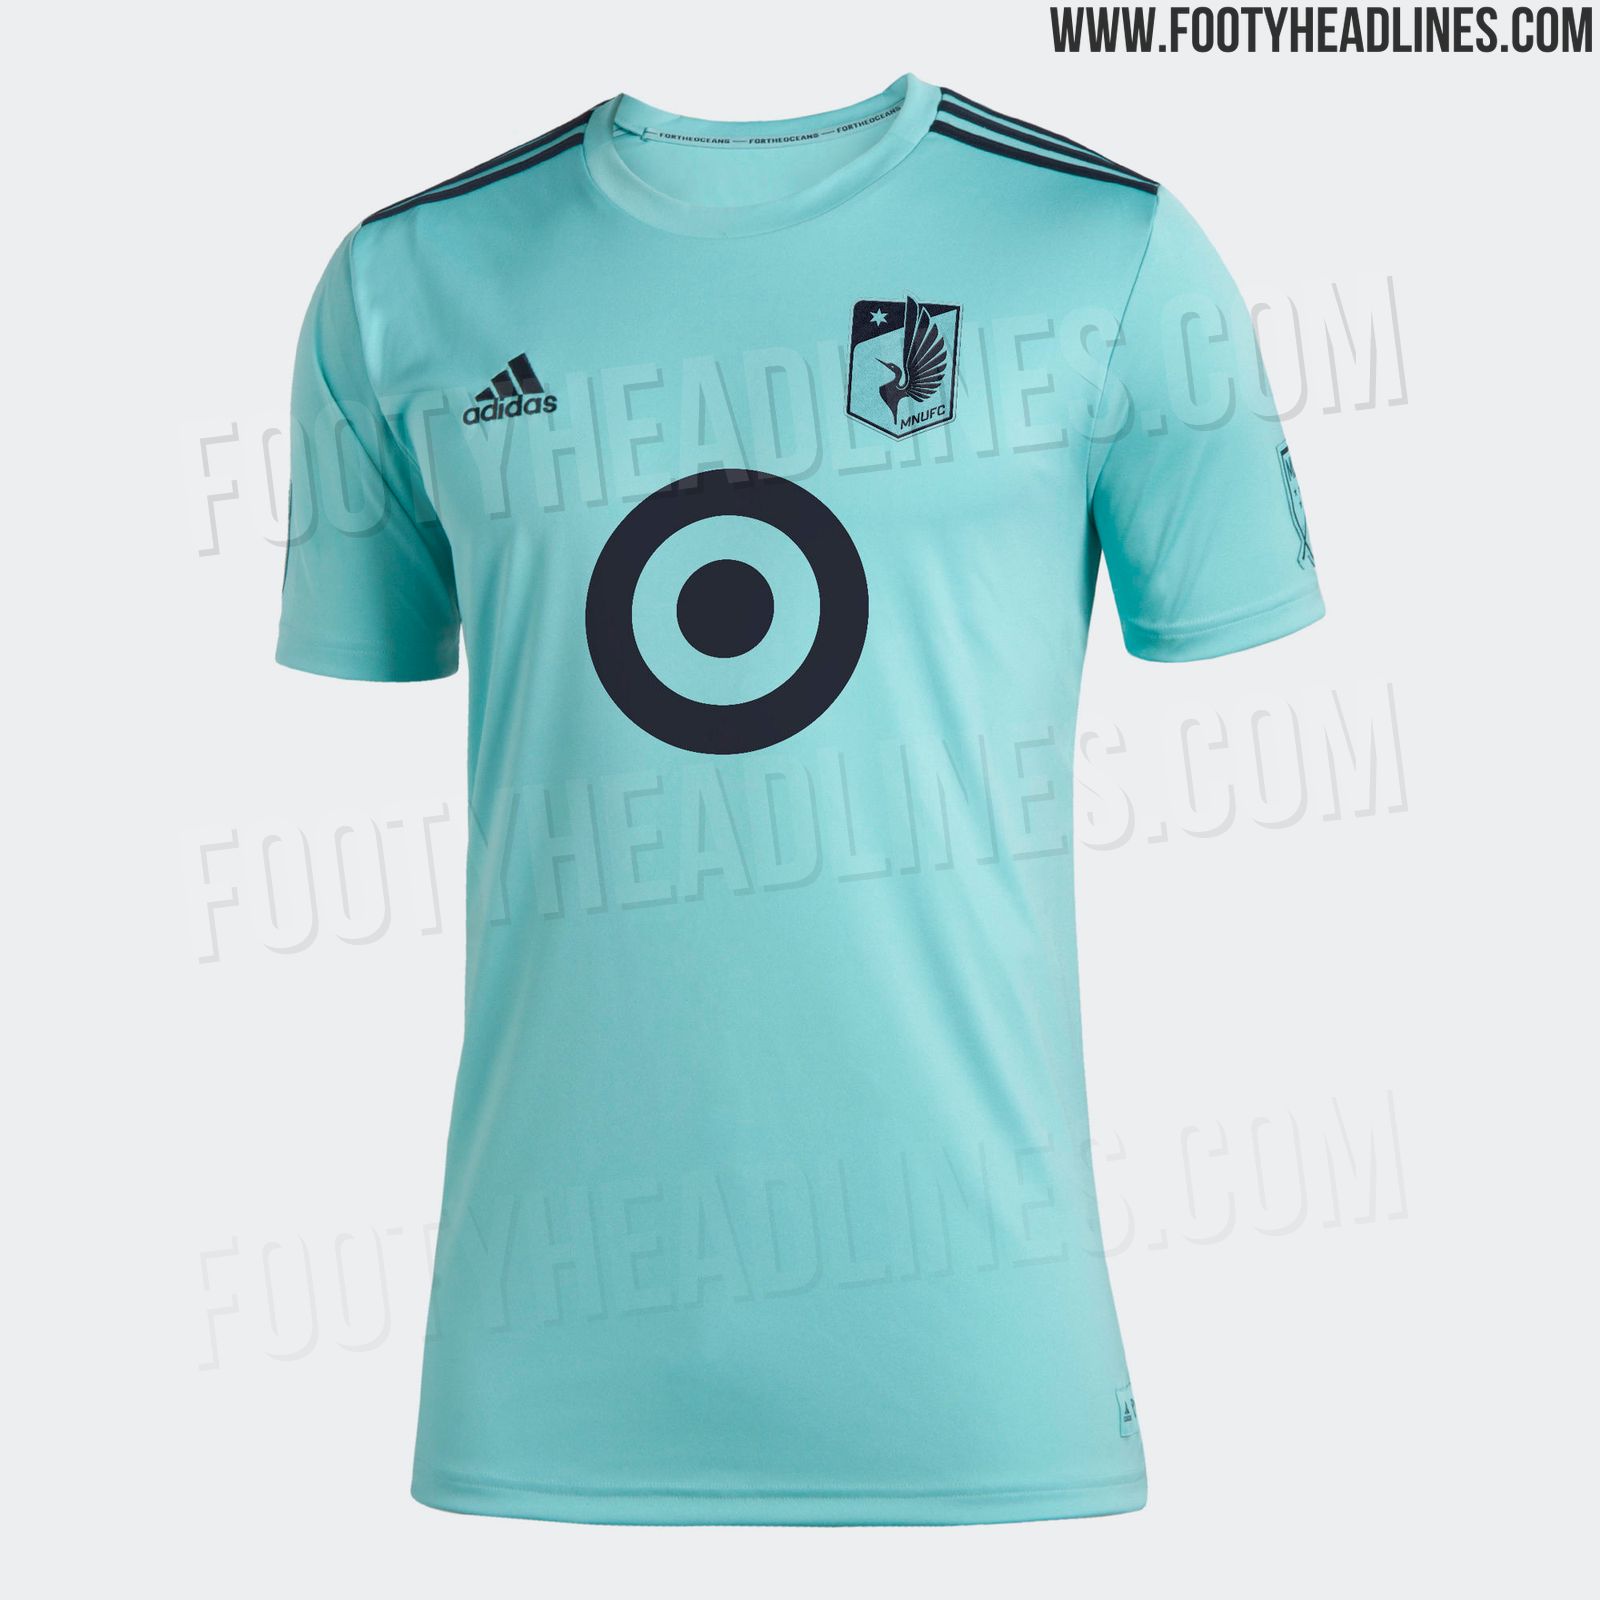 mn united jersey